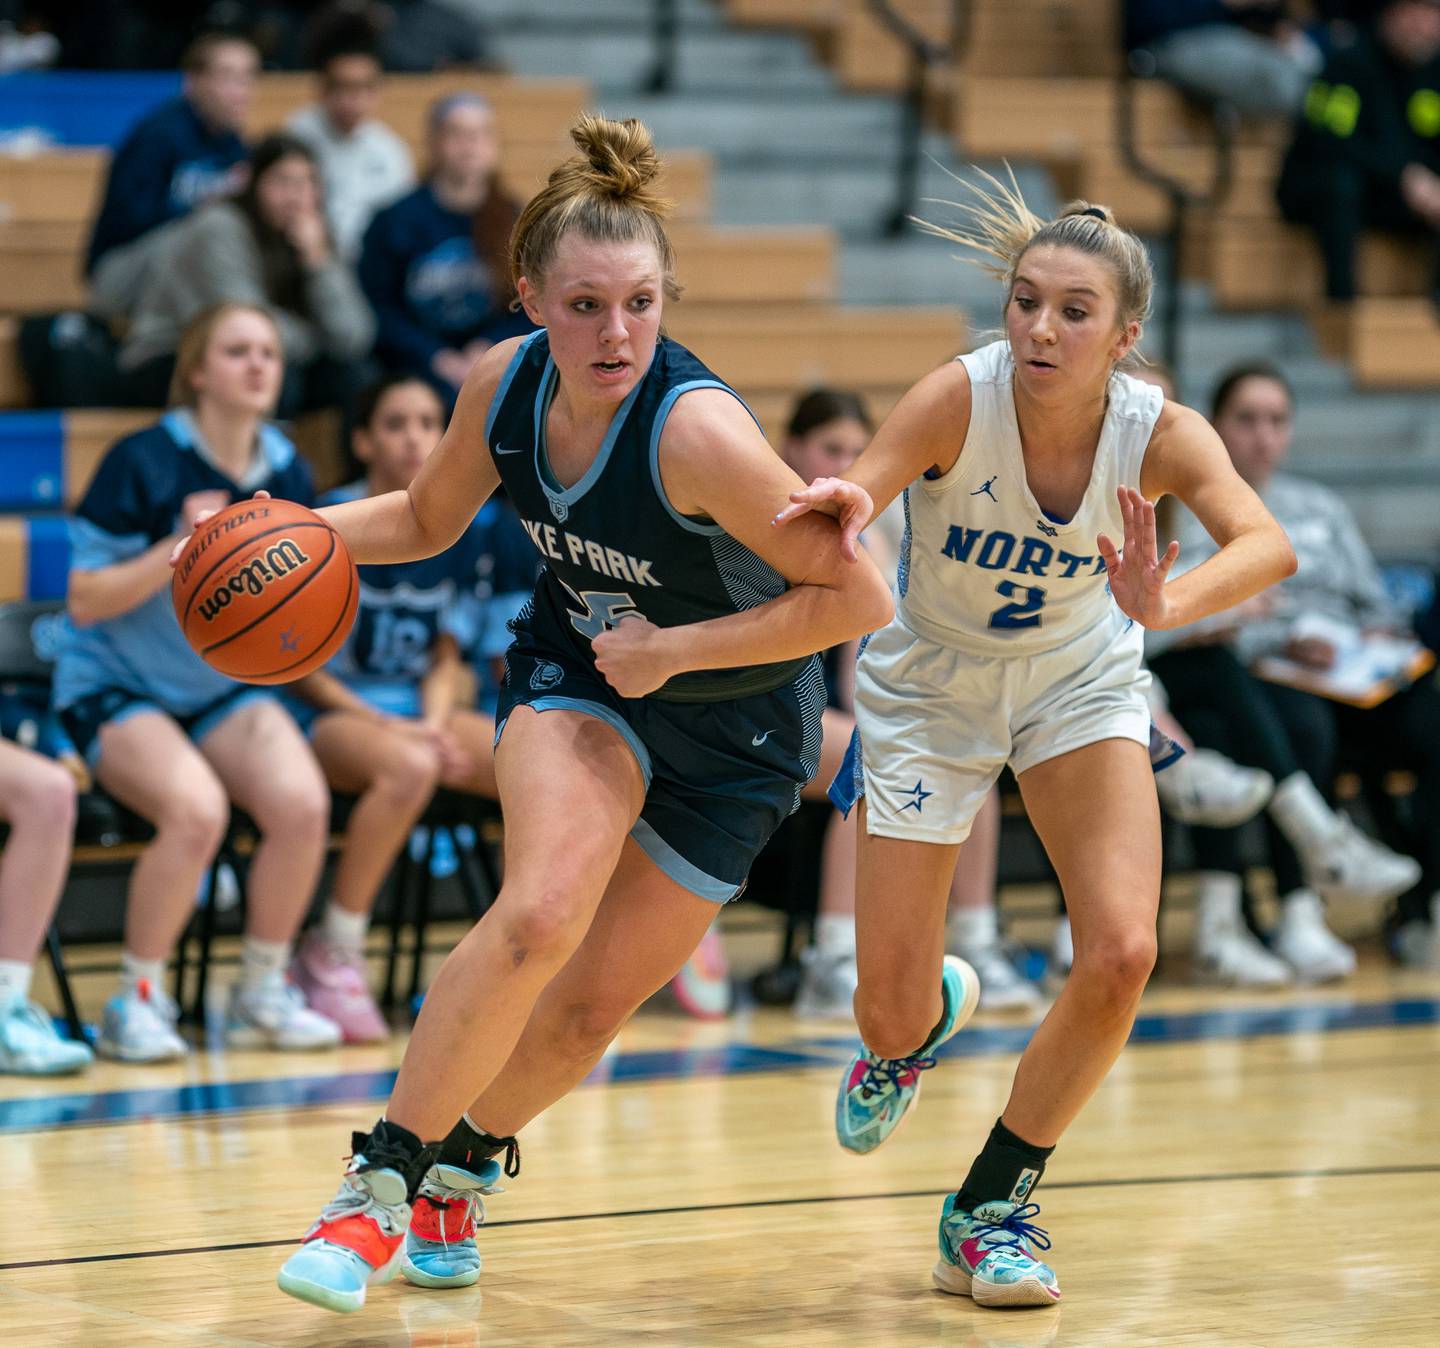 Lake Park's Grace Cord (35) drives the baseline against St.Charles North's Reagan Sipla (2) during a basketball game at St.Charles East High School on Wednesday, Dec 21, 2022.